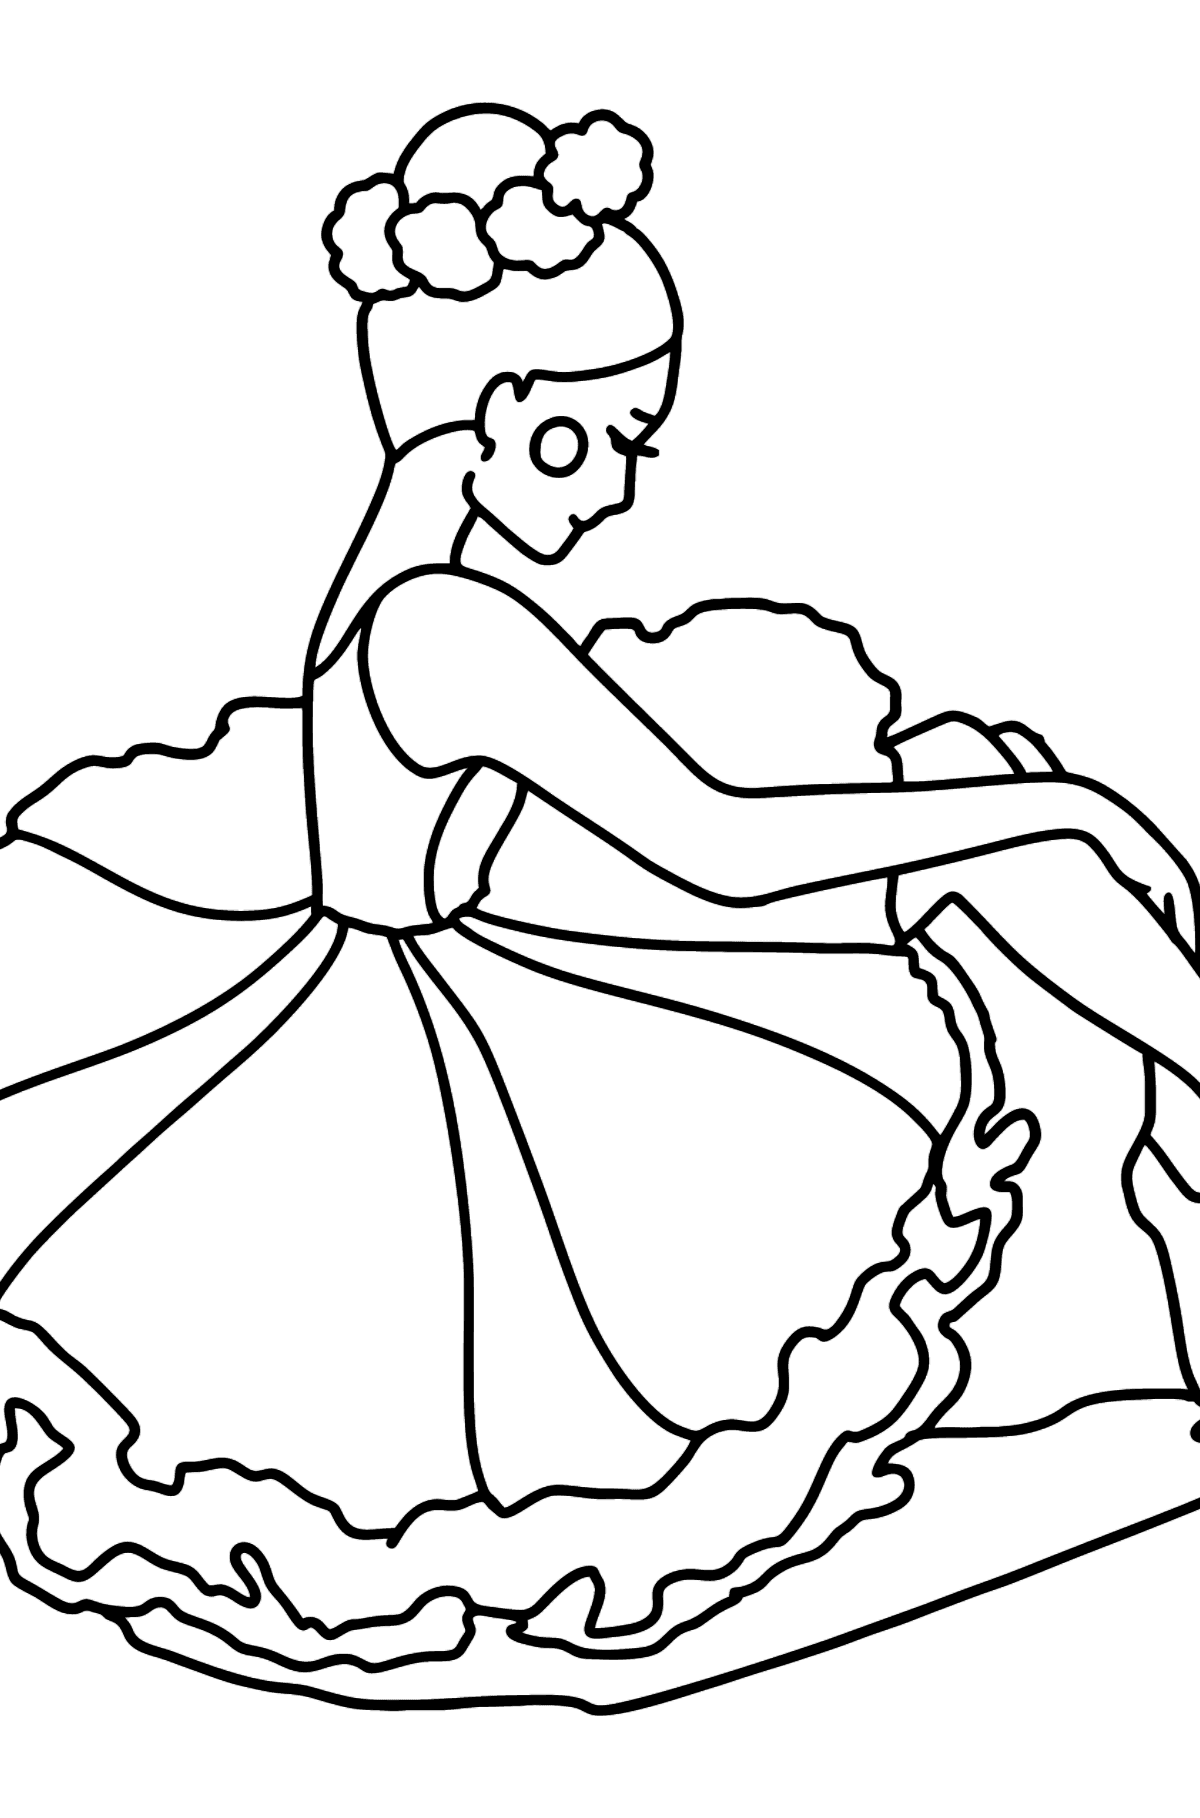 Ballerina coloring pages for Kids   Print for Free, and Color Online